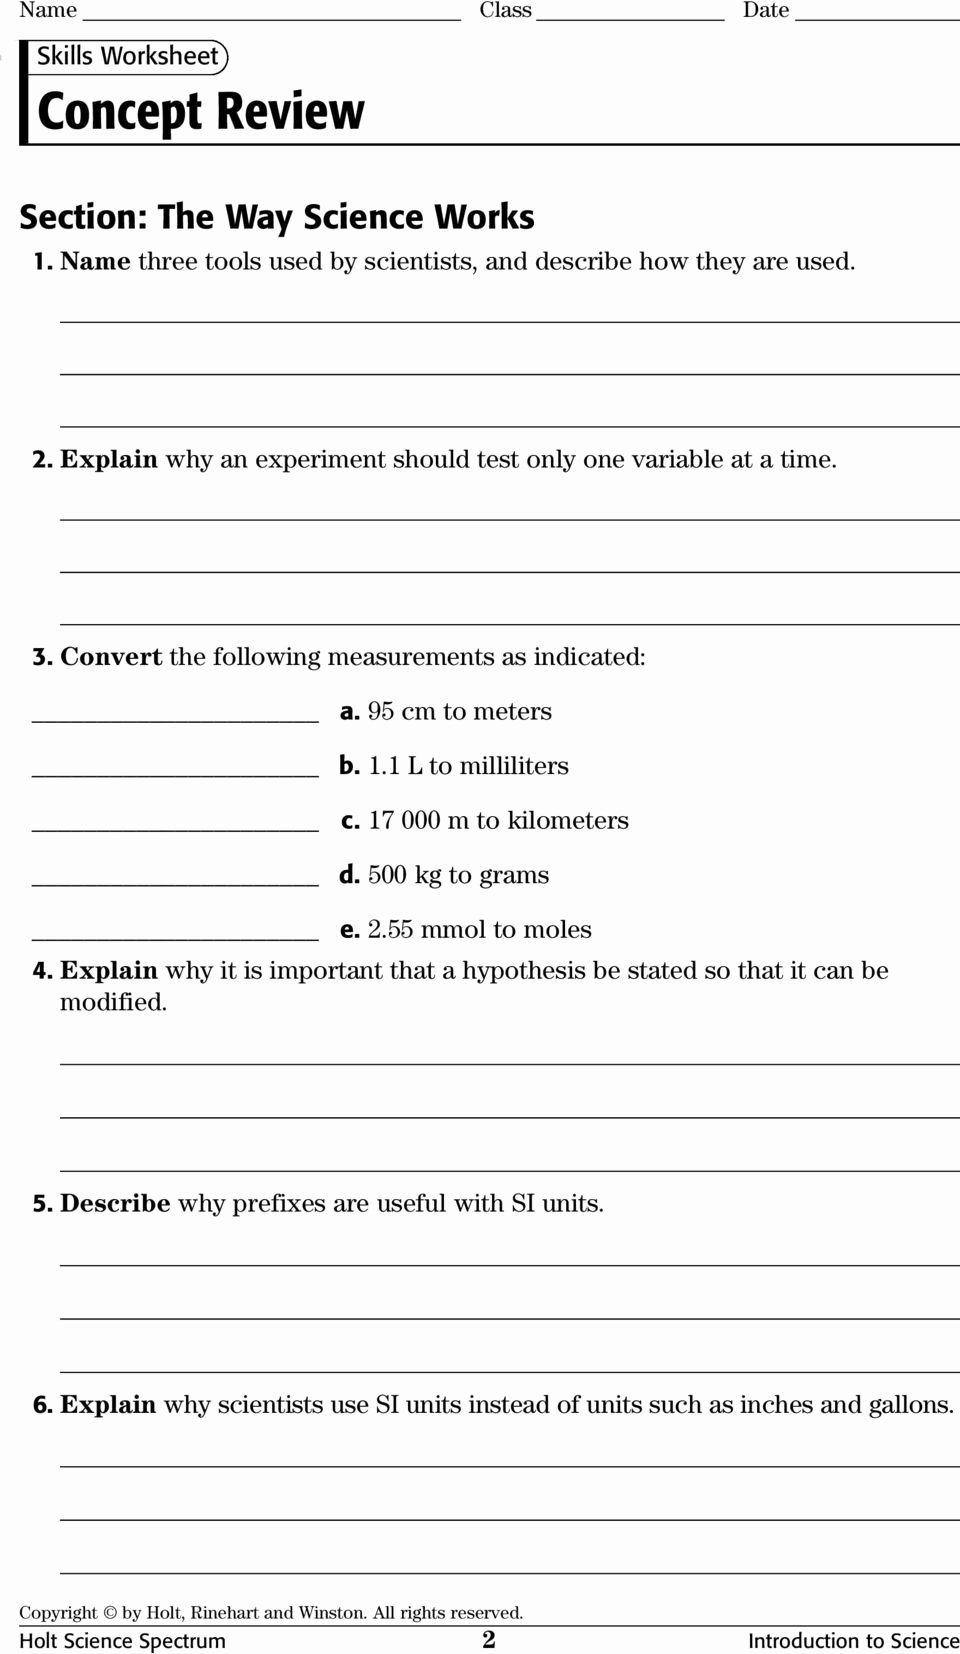 The Nature Of Science Worksheet Awesome Skills Worksheet Concept Review Section Balancing Chemical